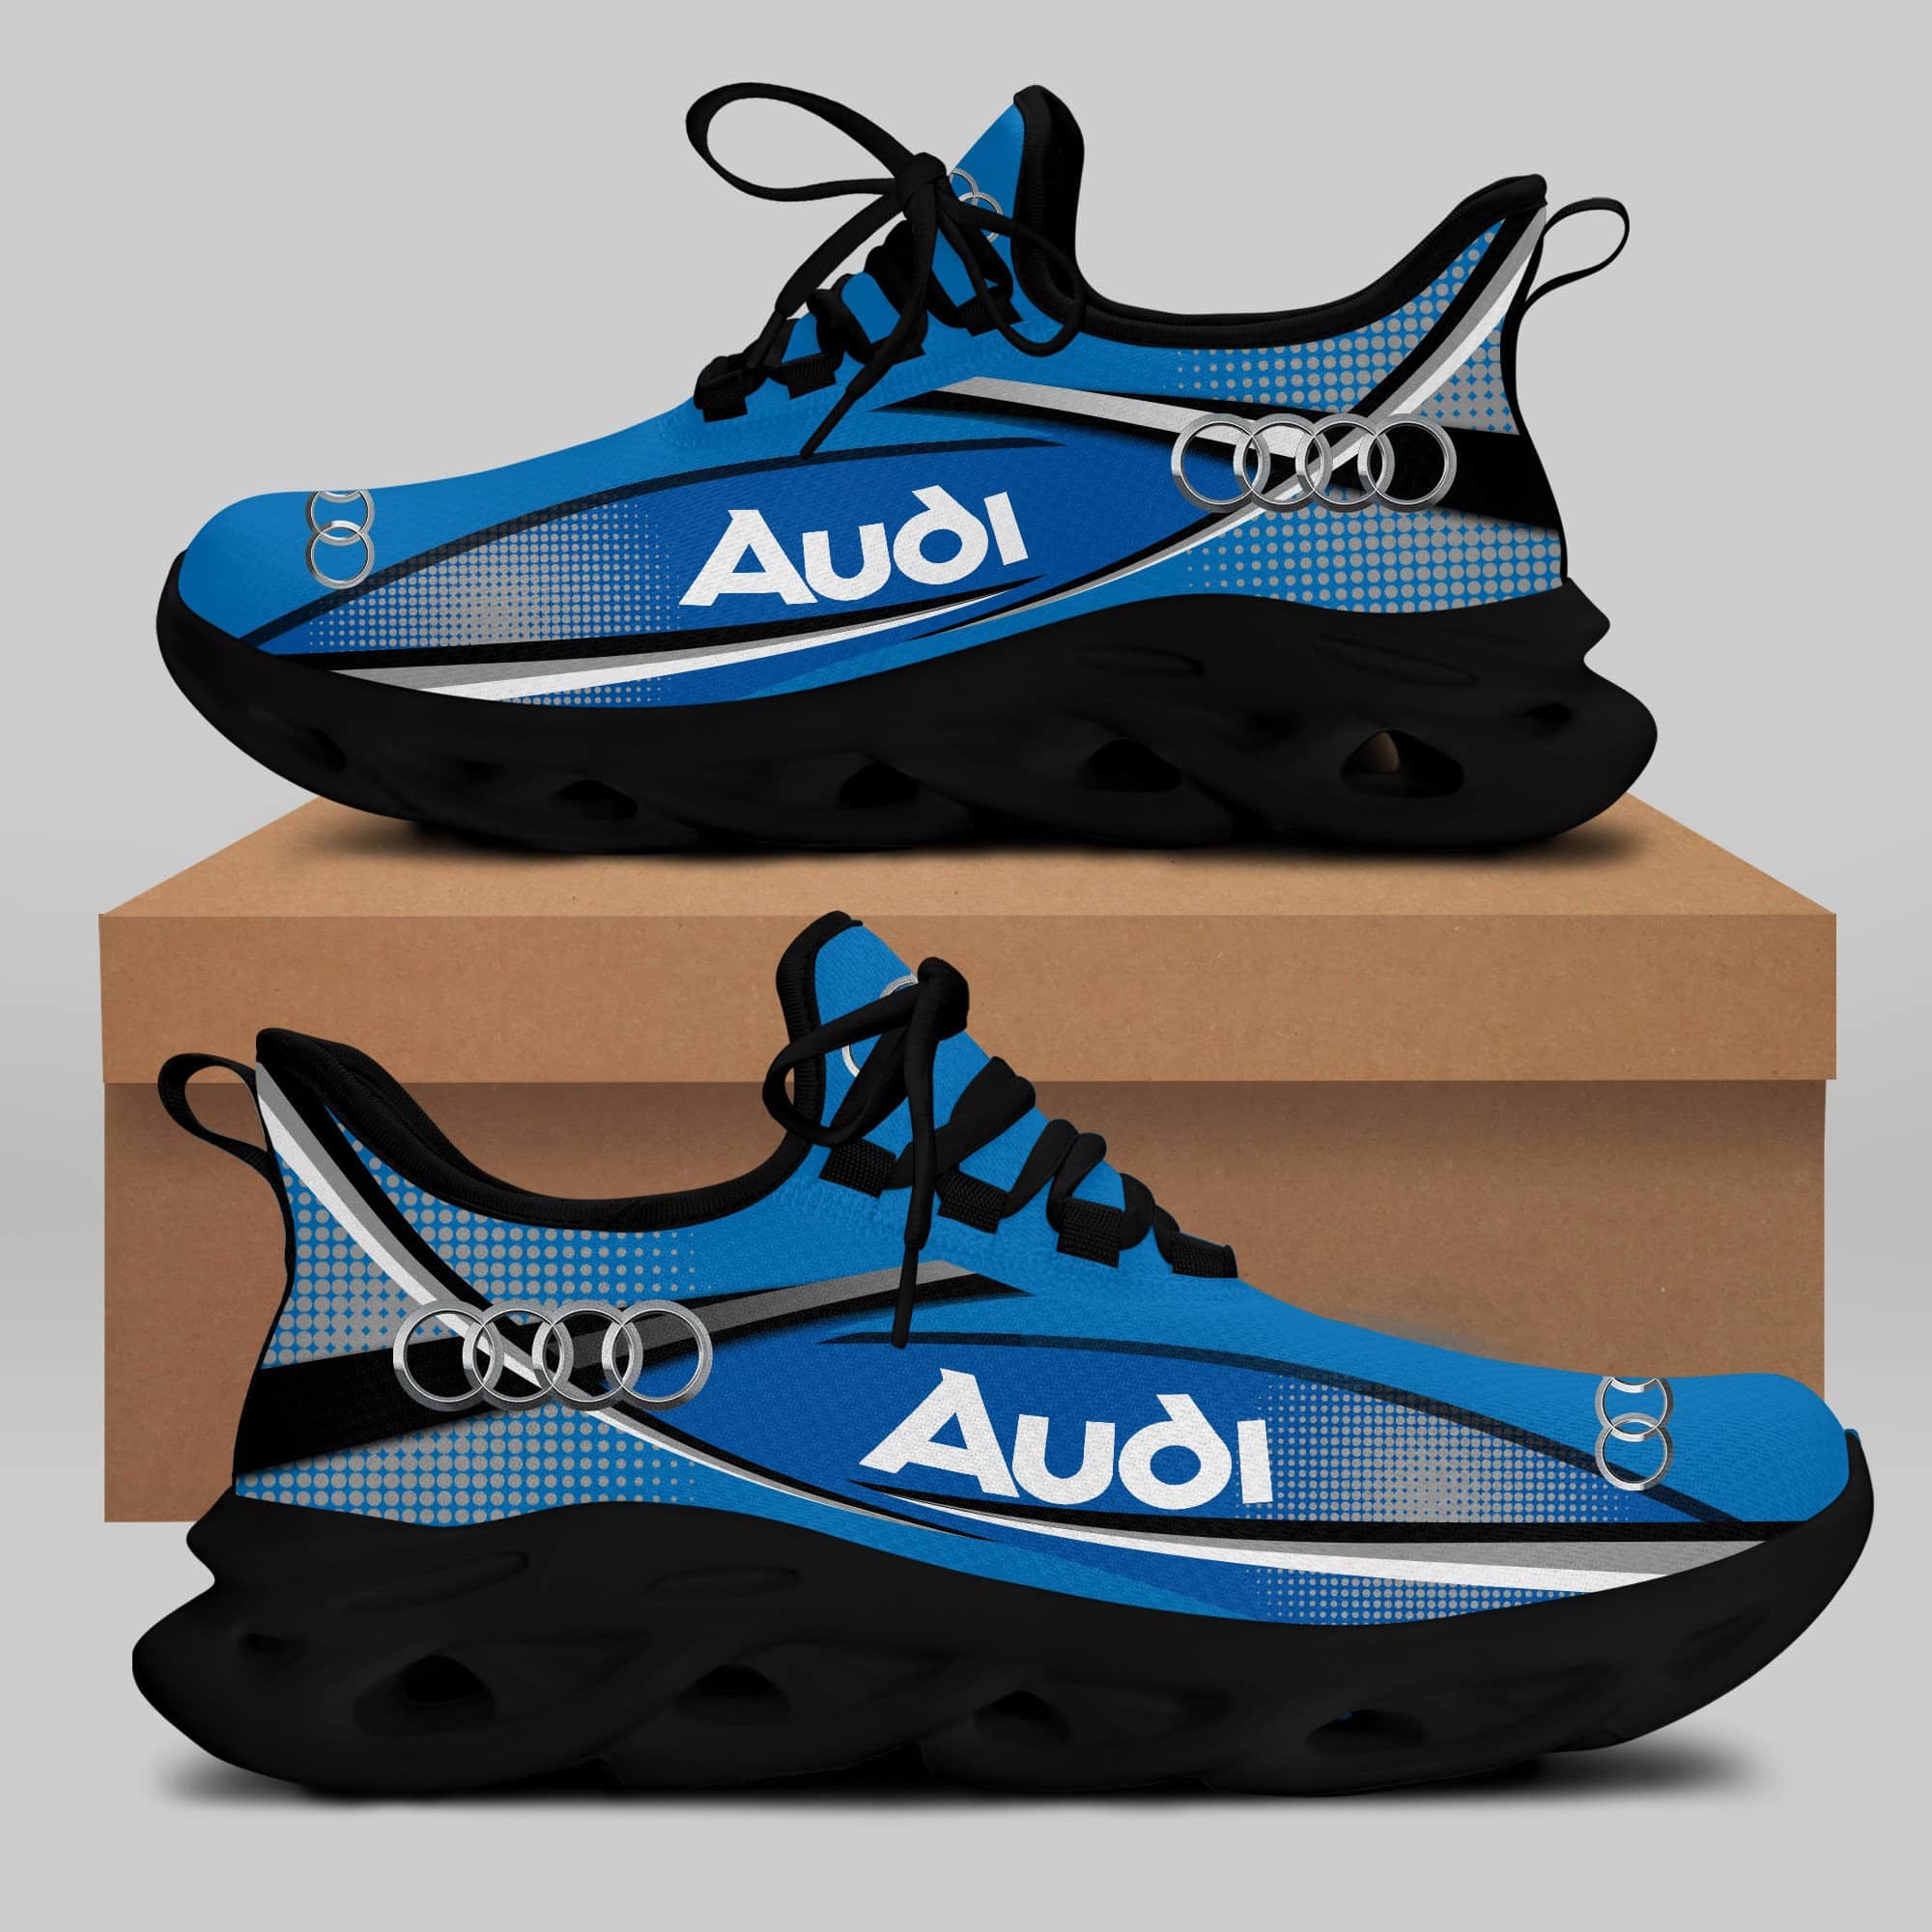 Audi Sport Running Shoes Max Soul Shoes Sneakers Ver 51 1